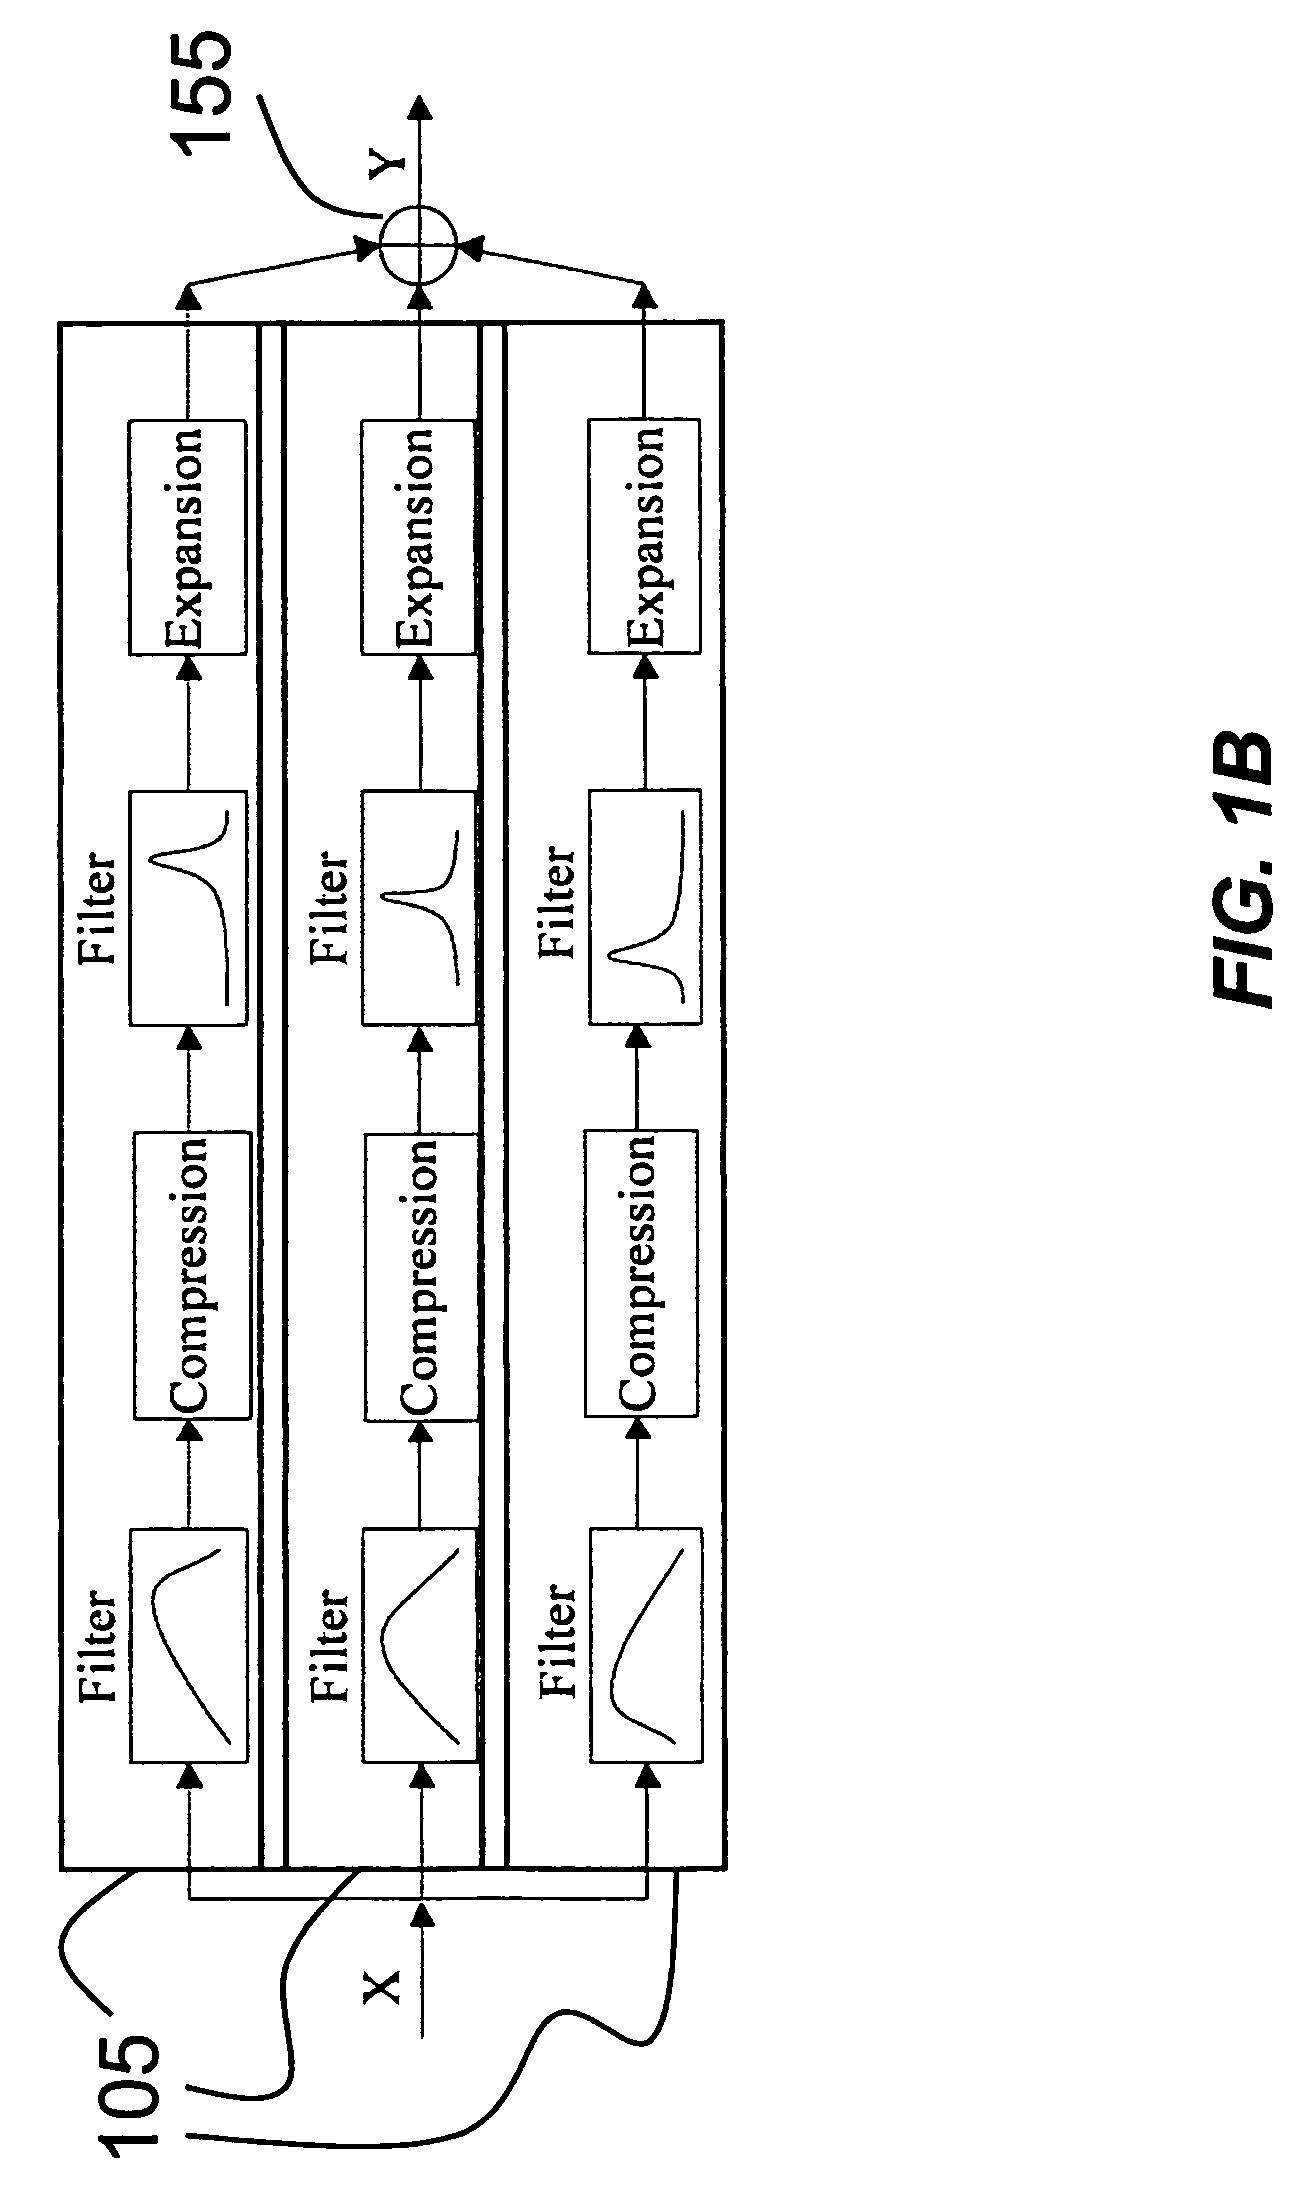 Method and system for FFT-based companding for automatic speech recognition